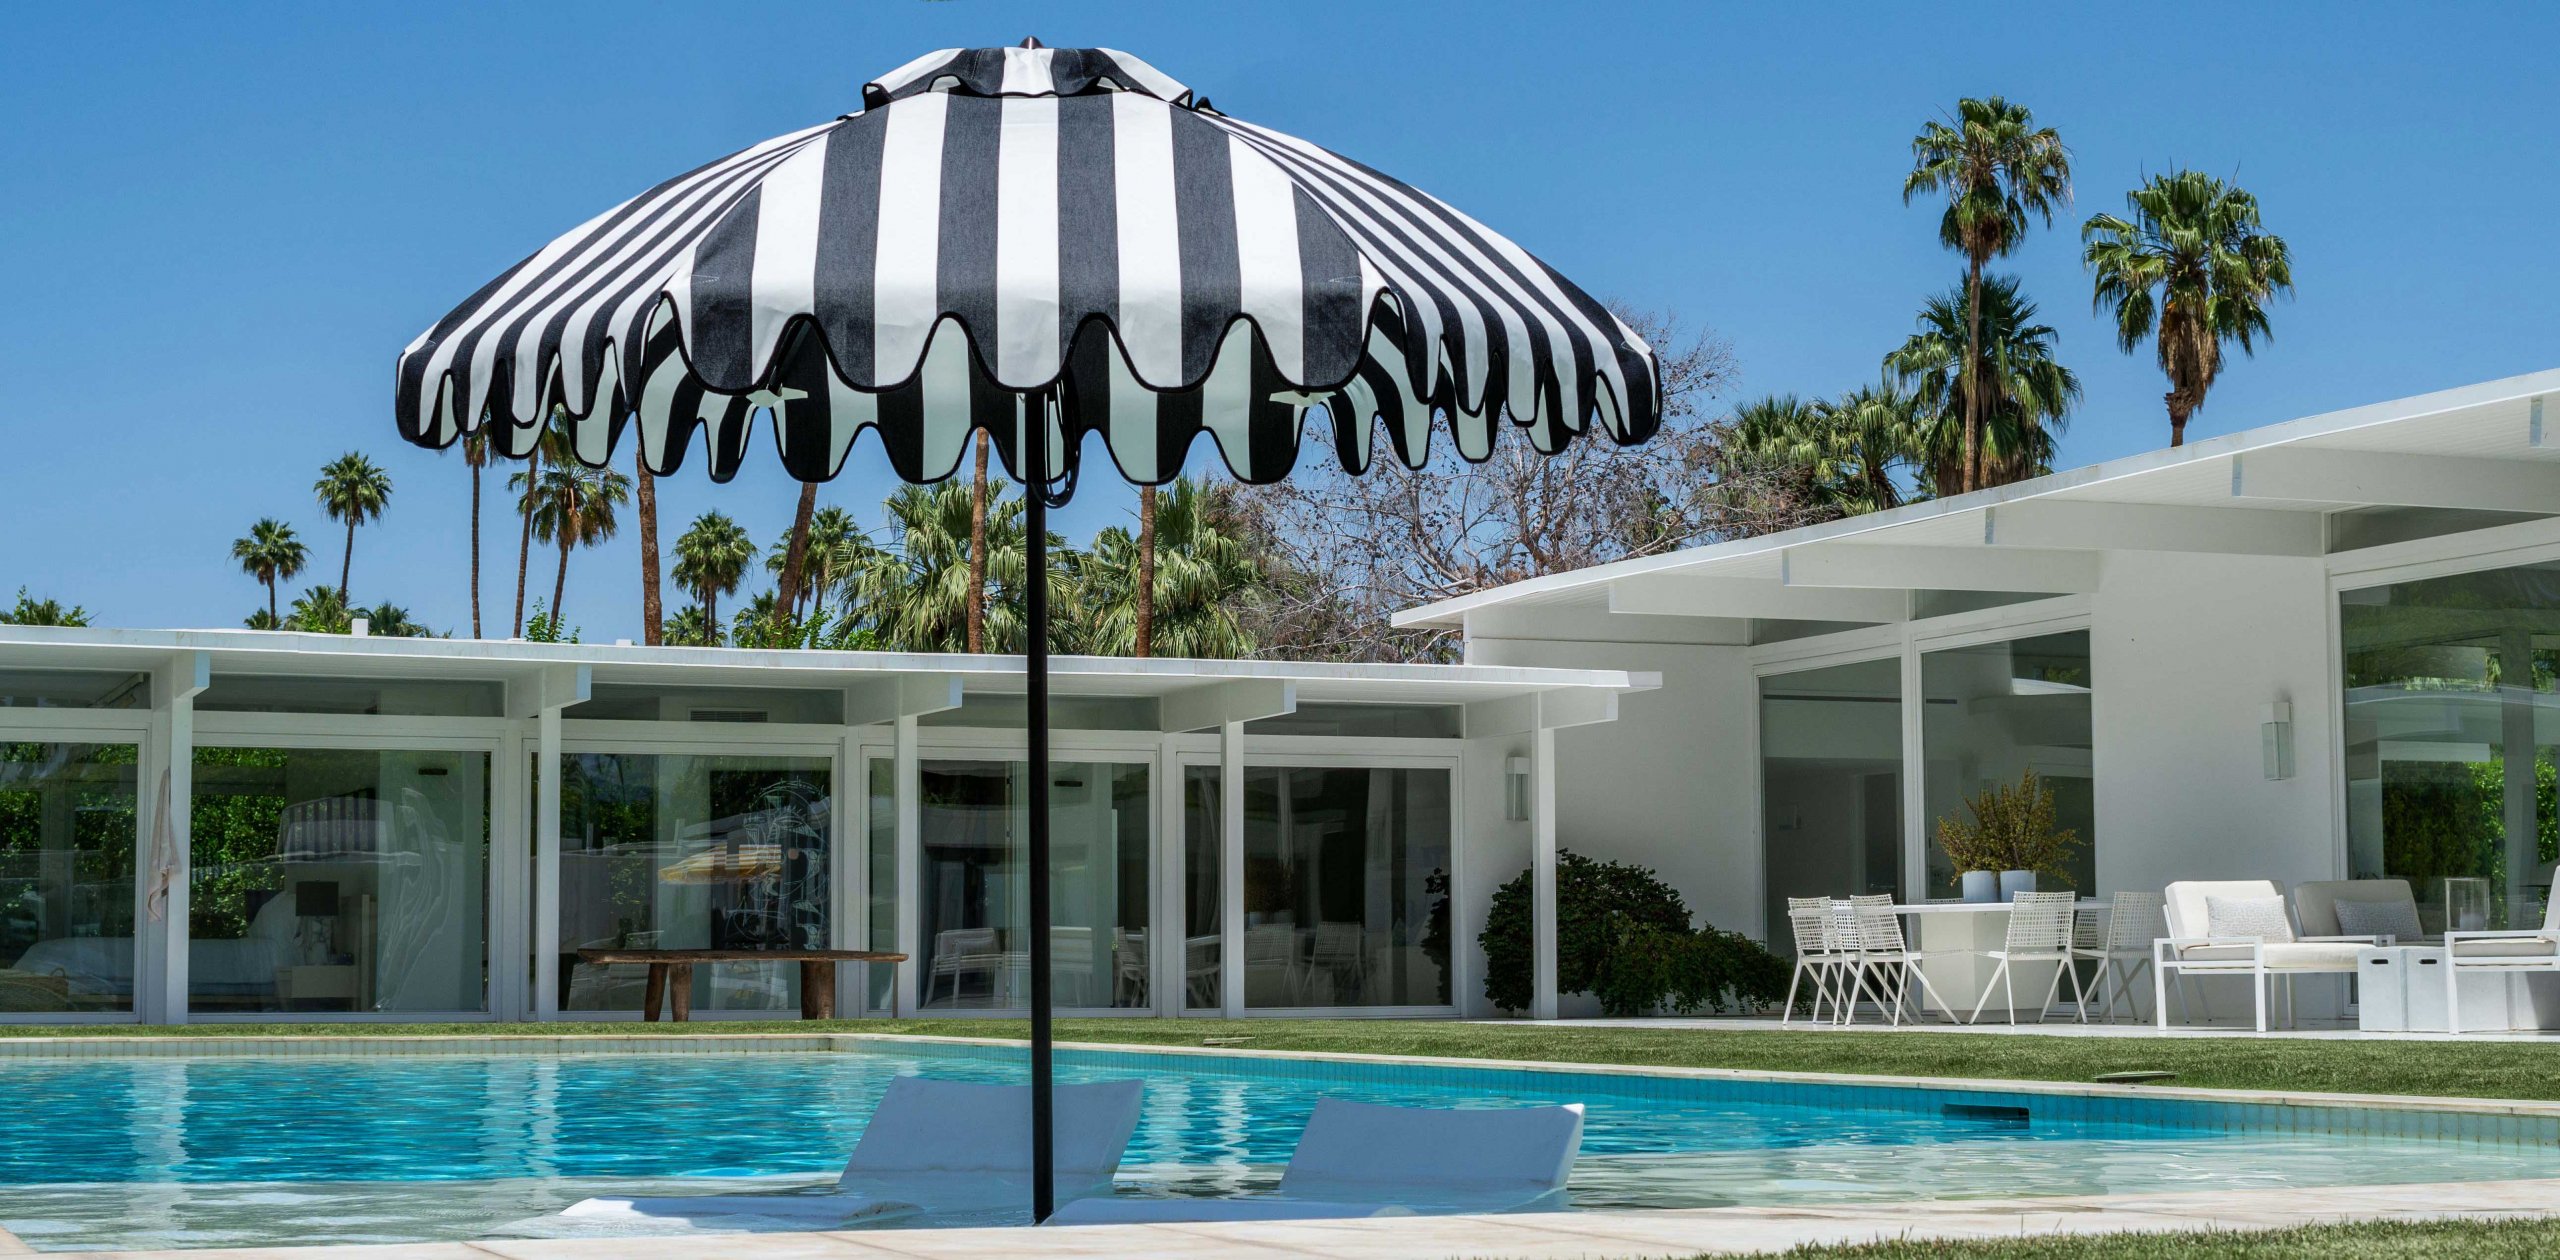 Image of umbrella in pool with chaises